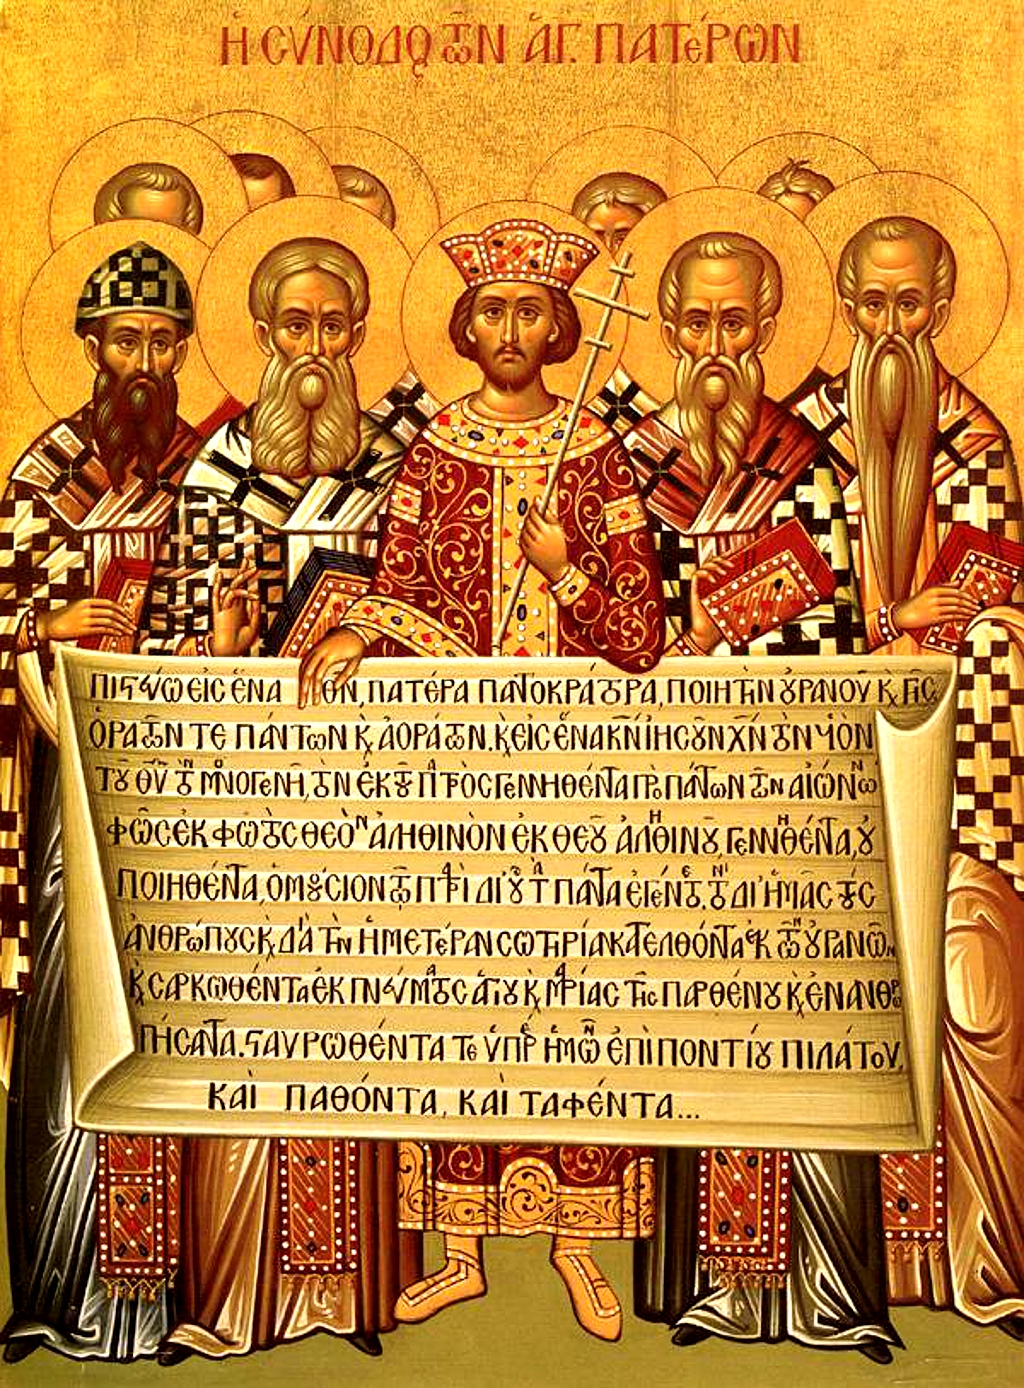 The Significance of the Nicene Creed as the Cornerstone of Christian Faith